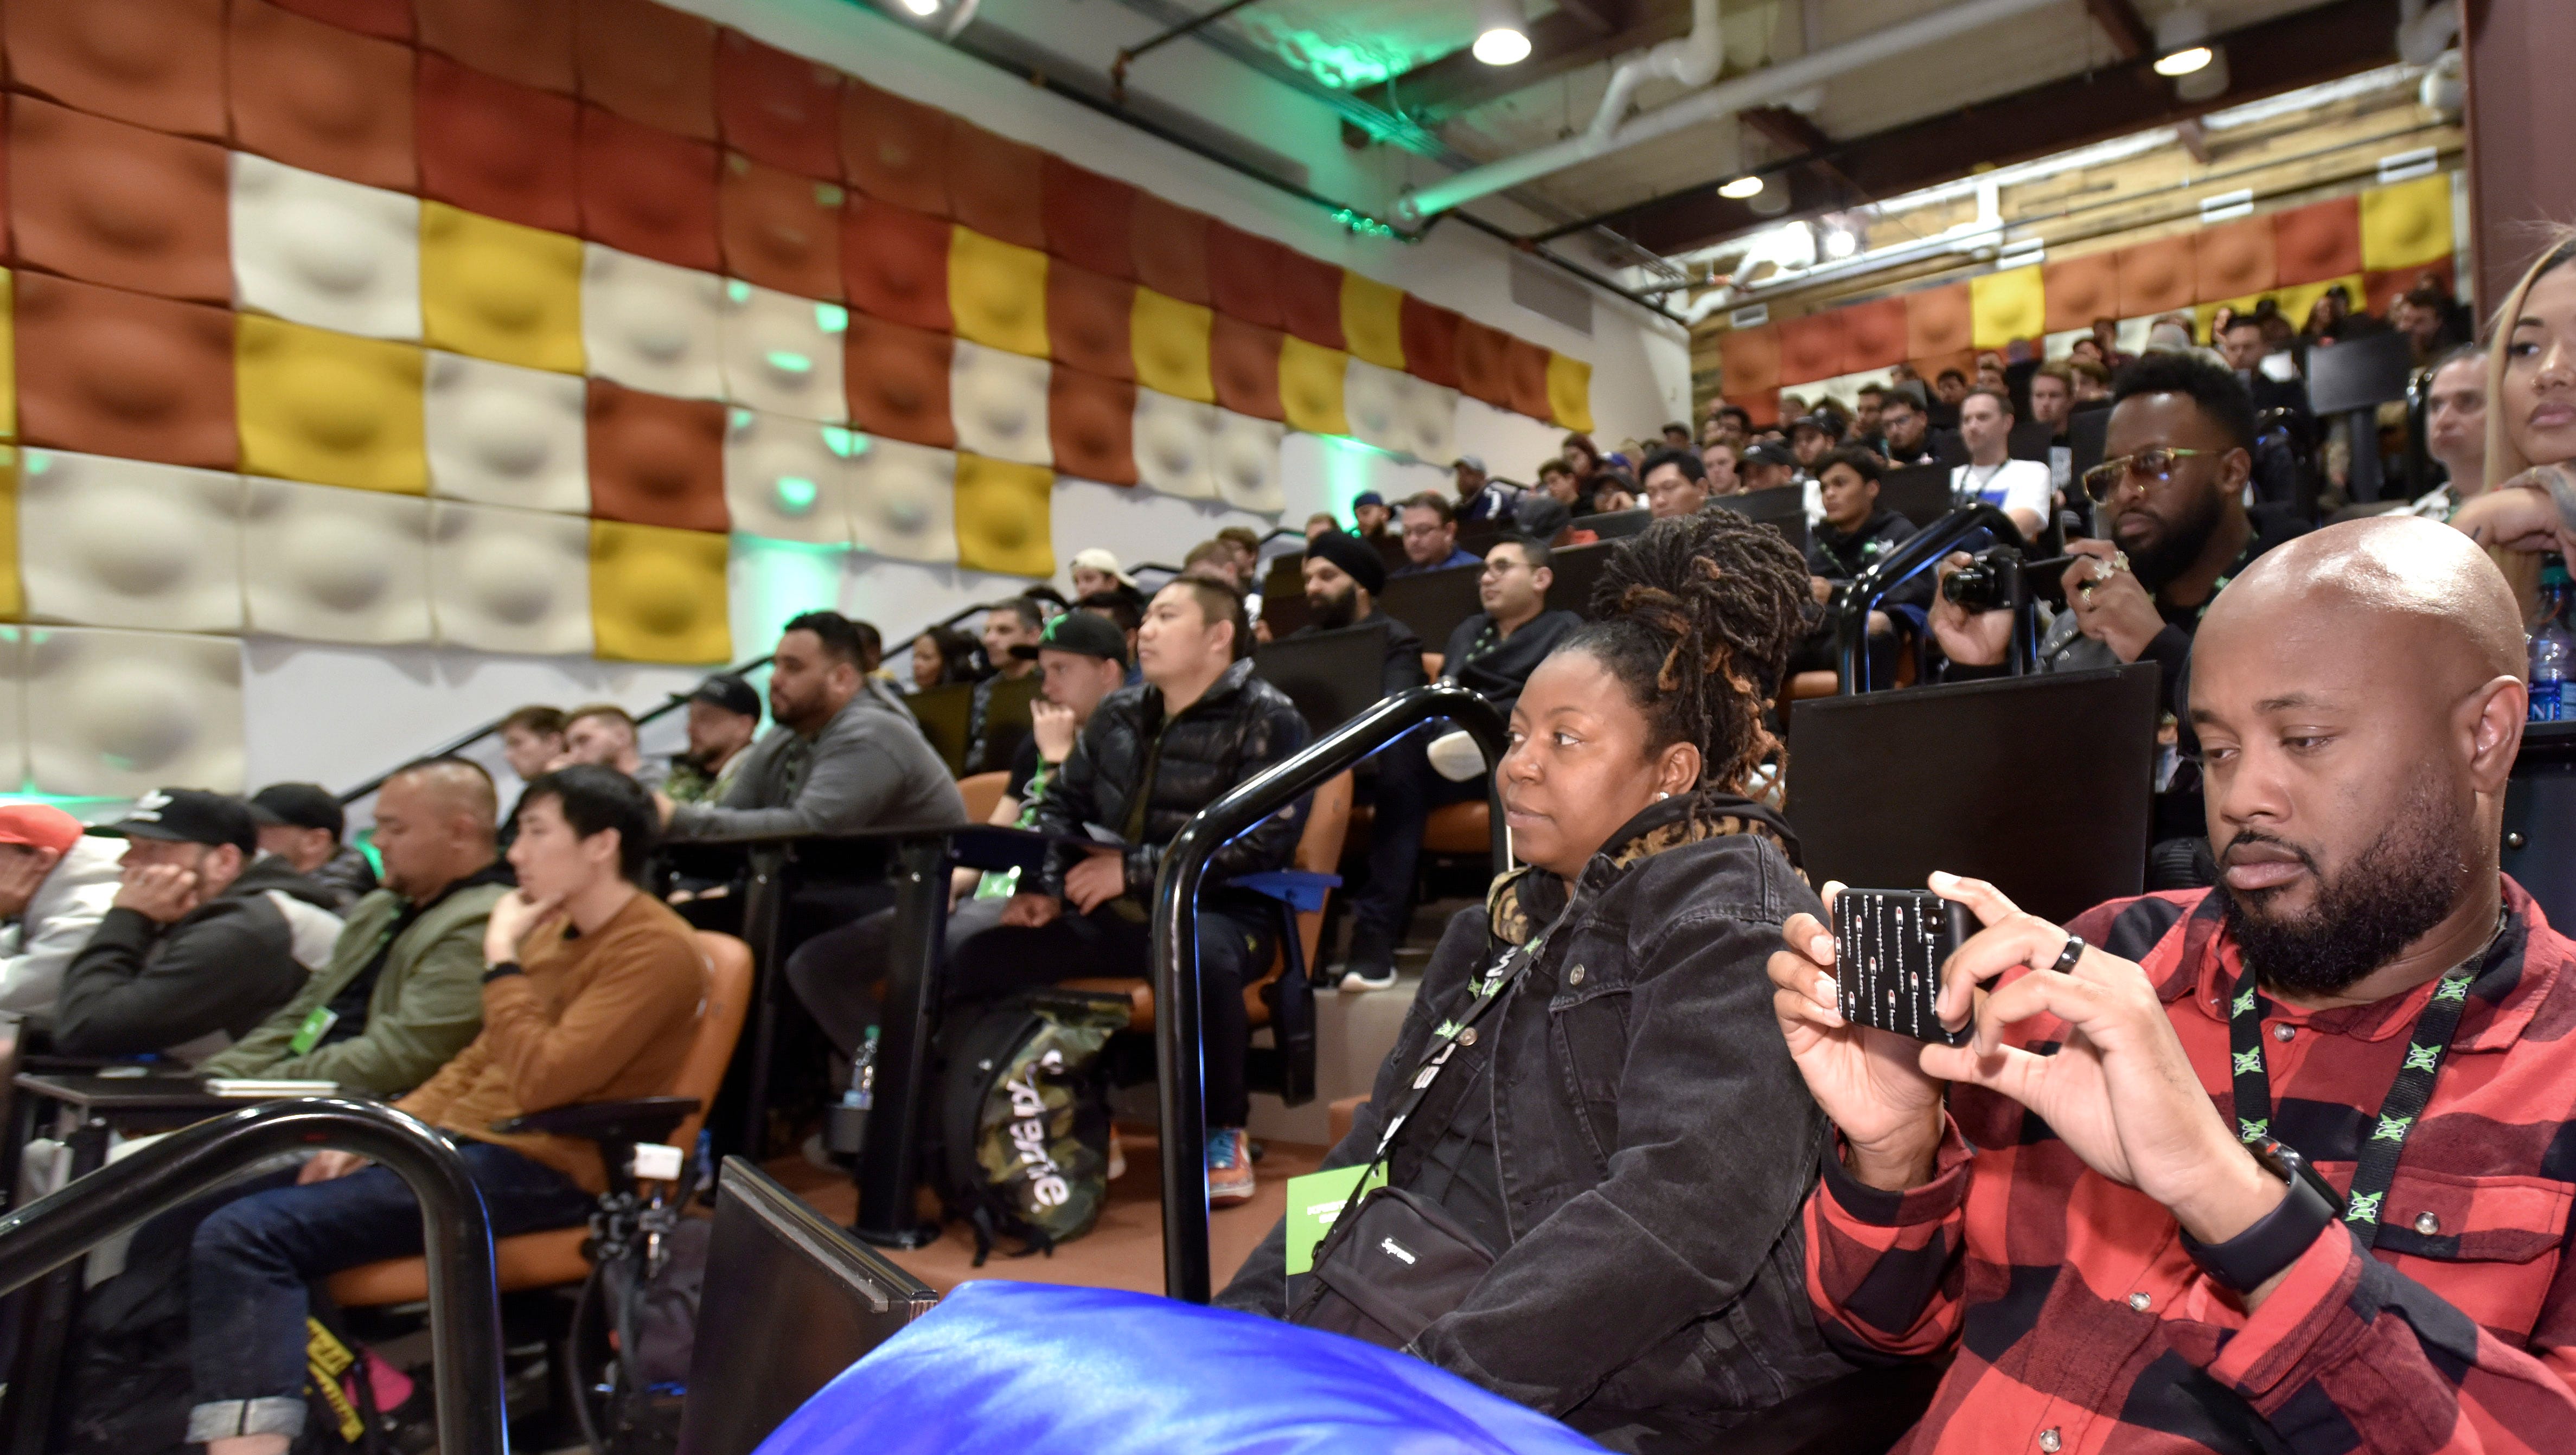 Ohmare Washington, right, 37, of Houston, records the Stock X event in Detroit.

XXXXBuyers, sellers and fans of StockX listen to company CEO and co-founder Josh Luber during the StockX Day2 event in the Madison building, Friday afternoon, April 20, 2018. StockX is a secondary market for the resale of sneakers, street wear, hand bags and watches. (Todd McInturf, The Detroit News)2018.